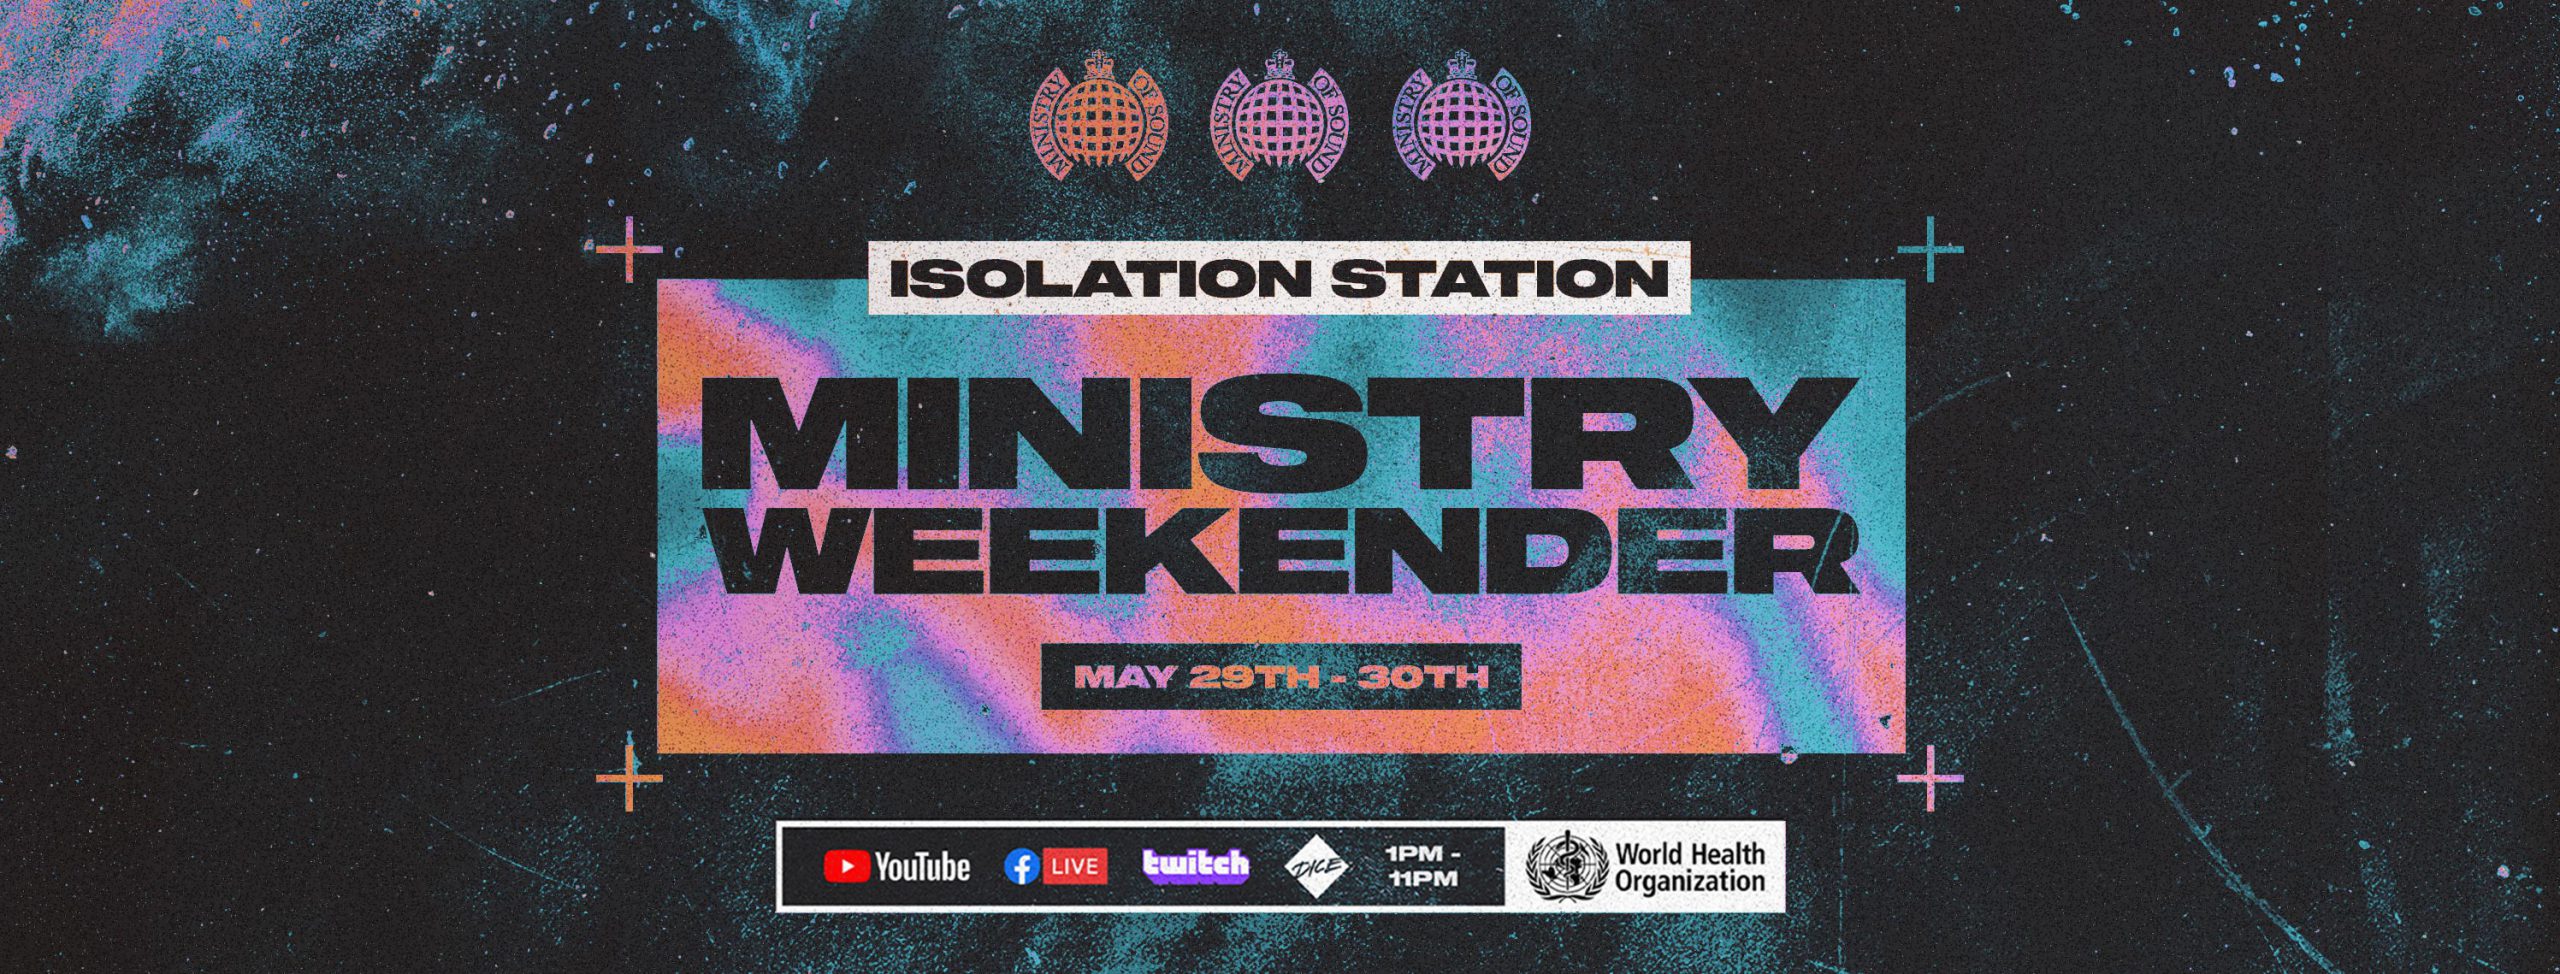 Ministry of Sound Ministry Weekender Banner